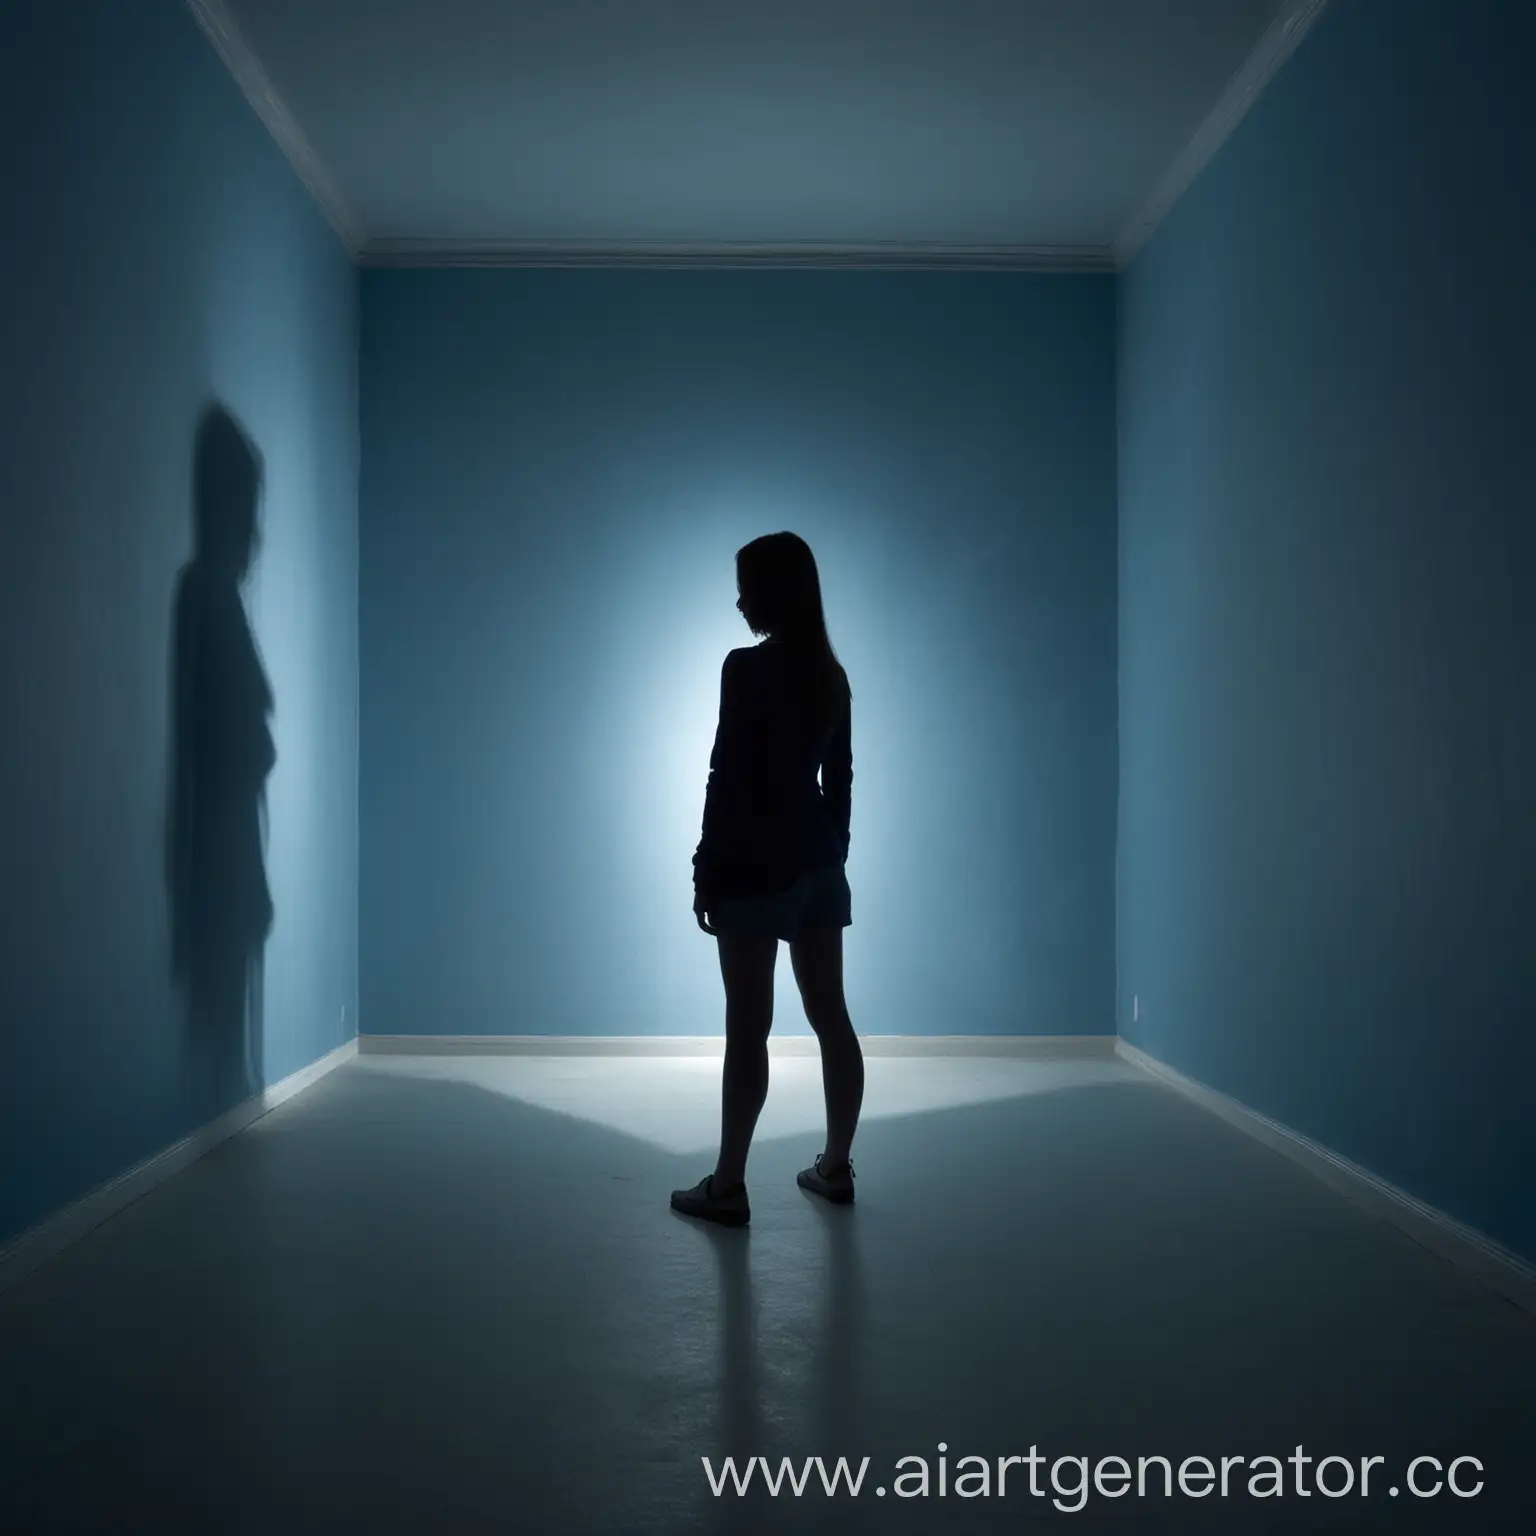 Solo-Pose-in-Dim-Blue-Room-Girl-and-Her-Shadow-Portrait